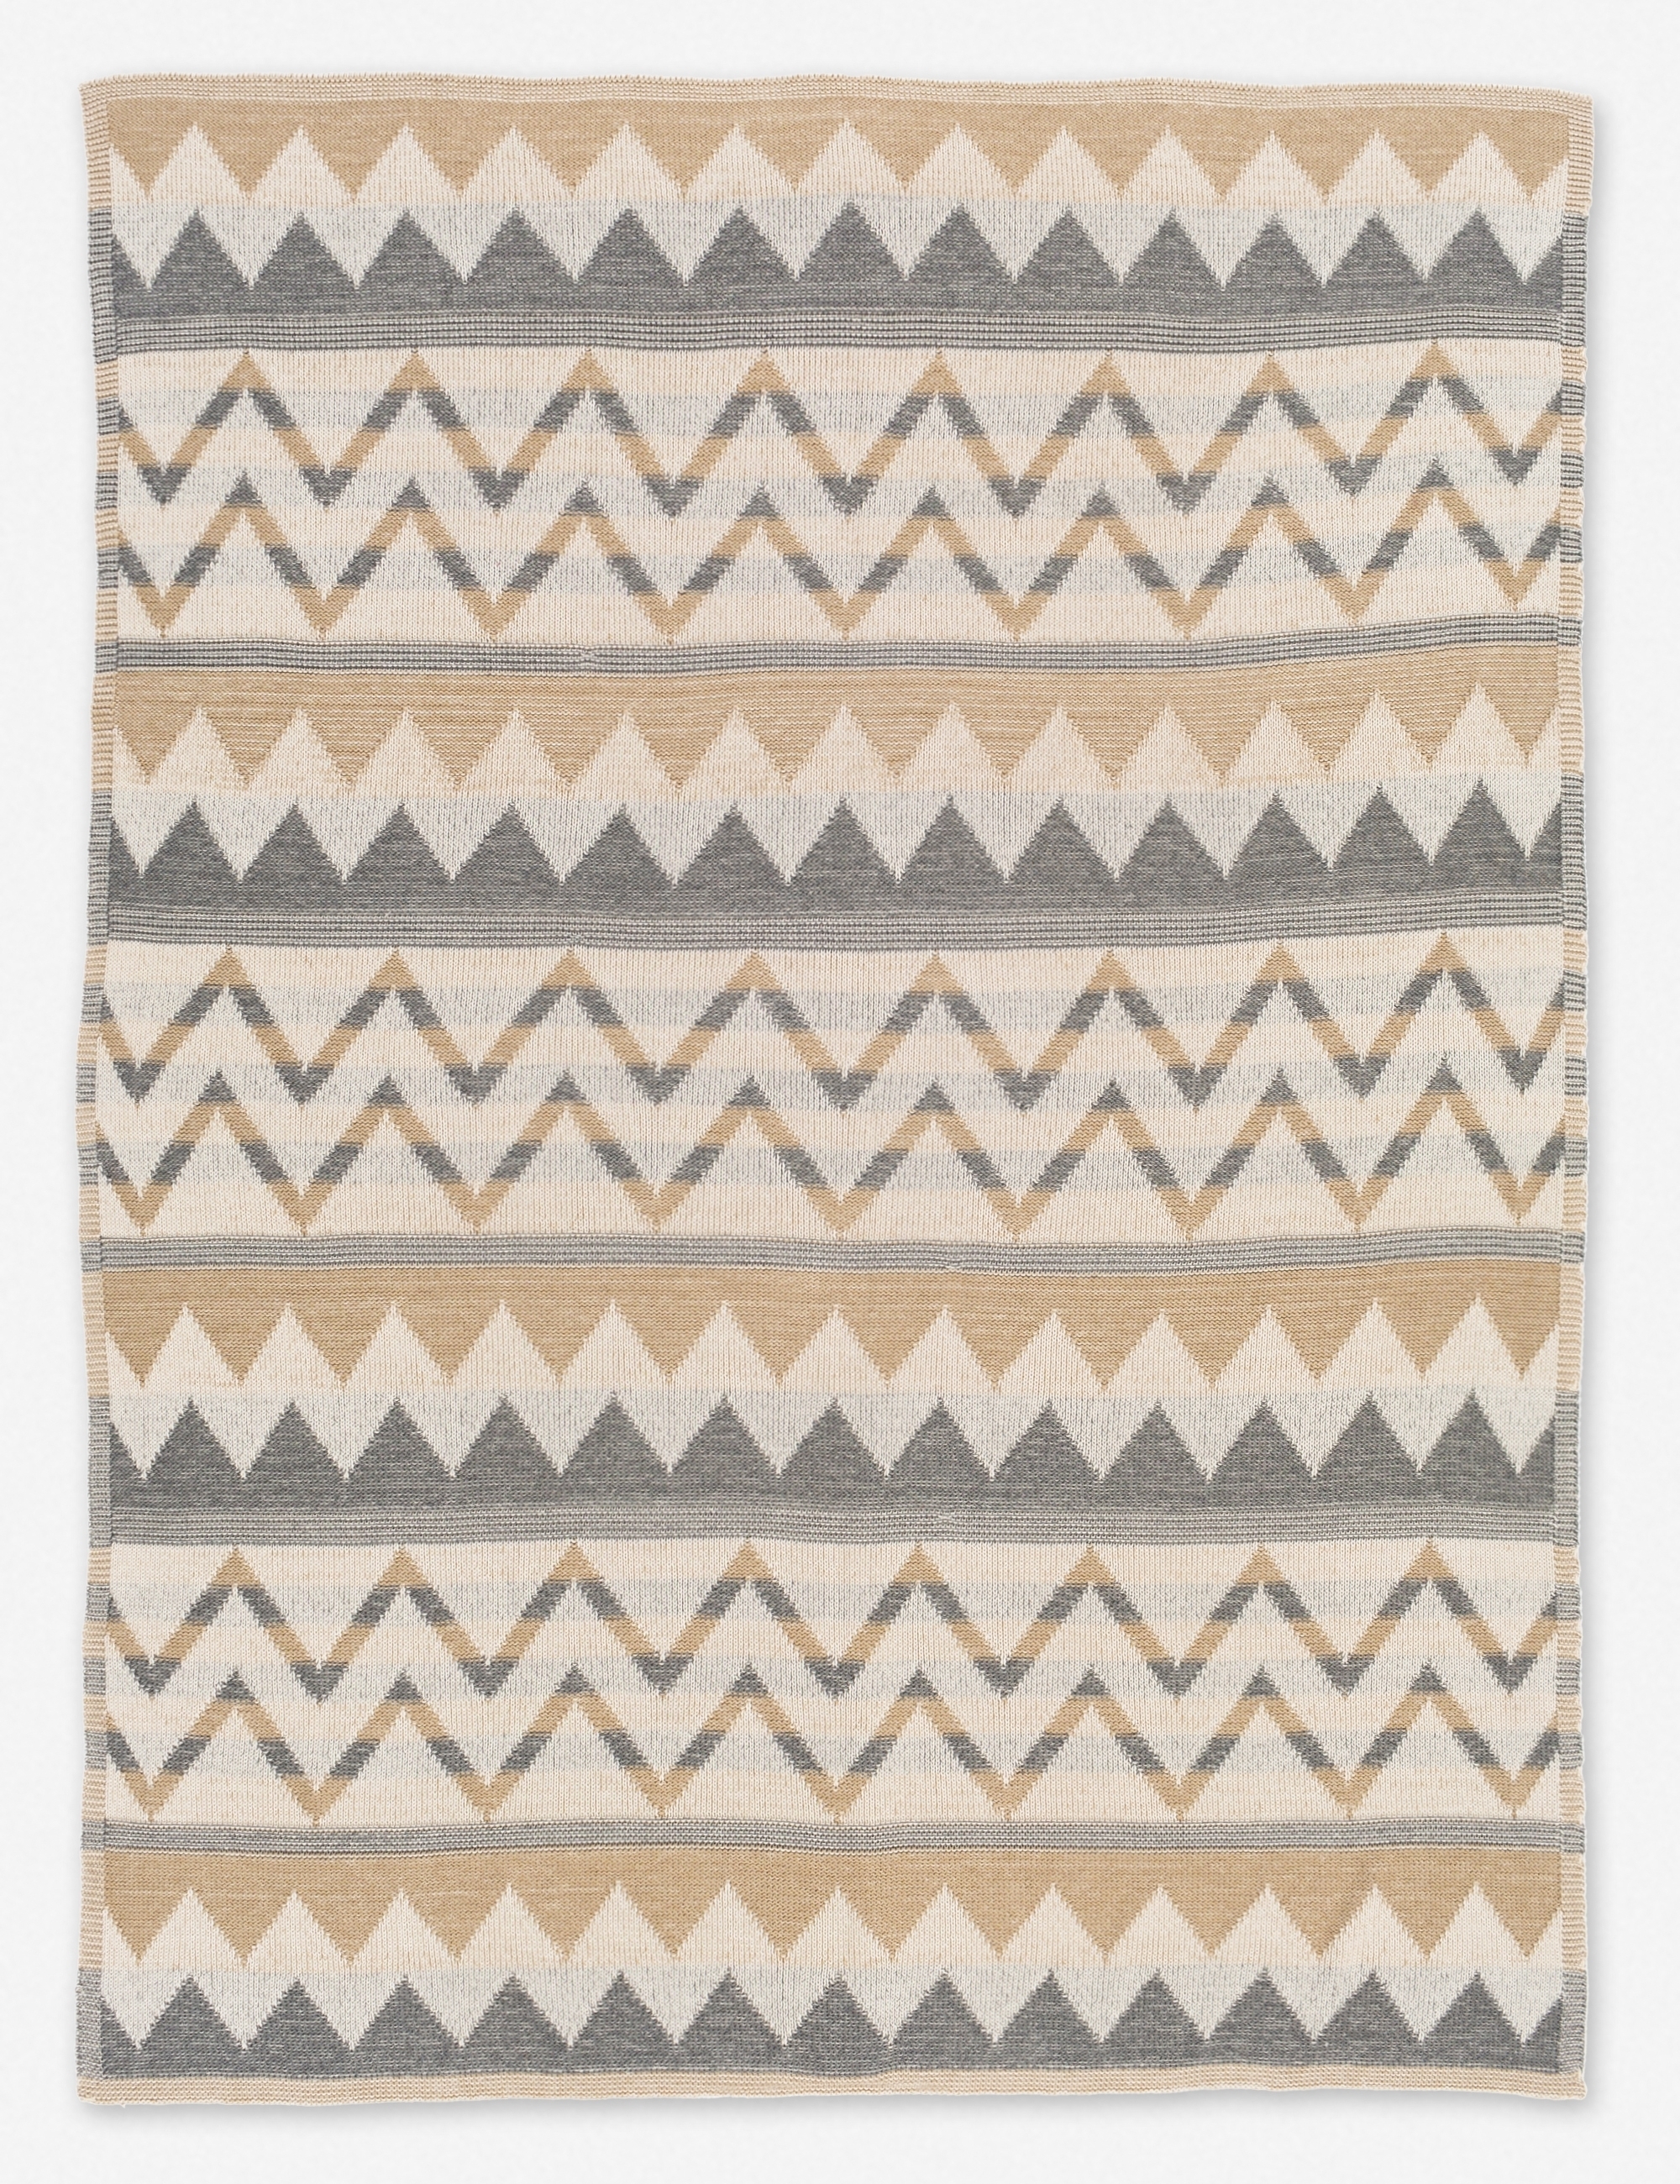 Everly Throw, Multicolor - Image 1